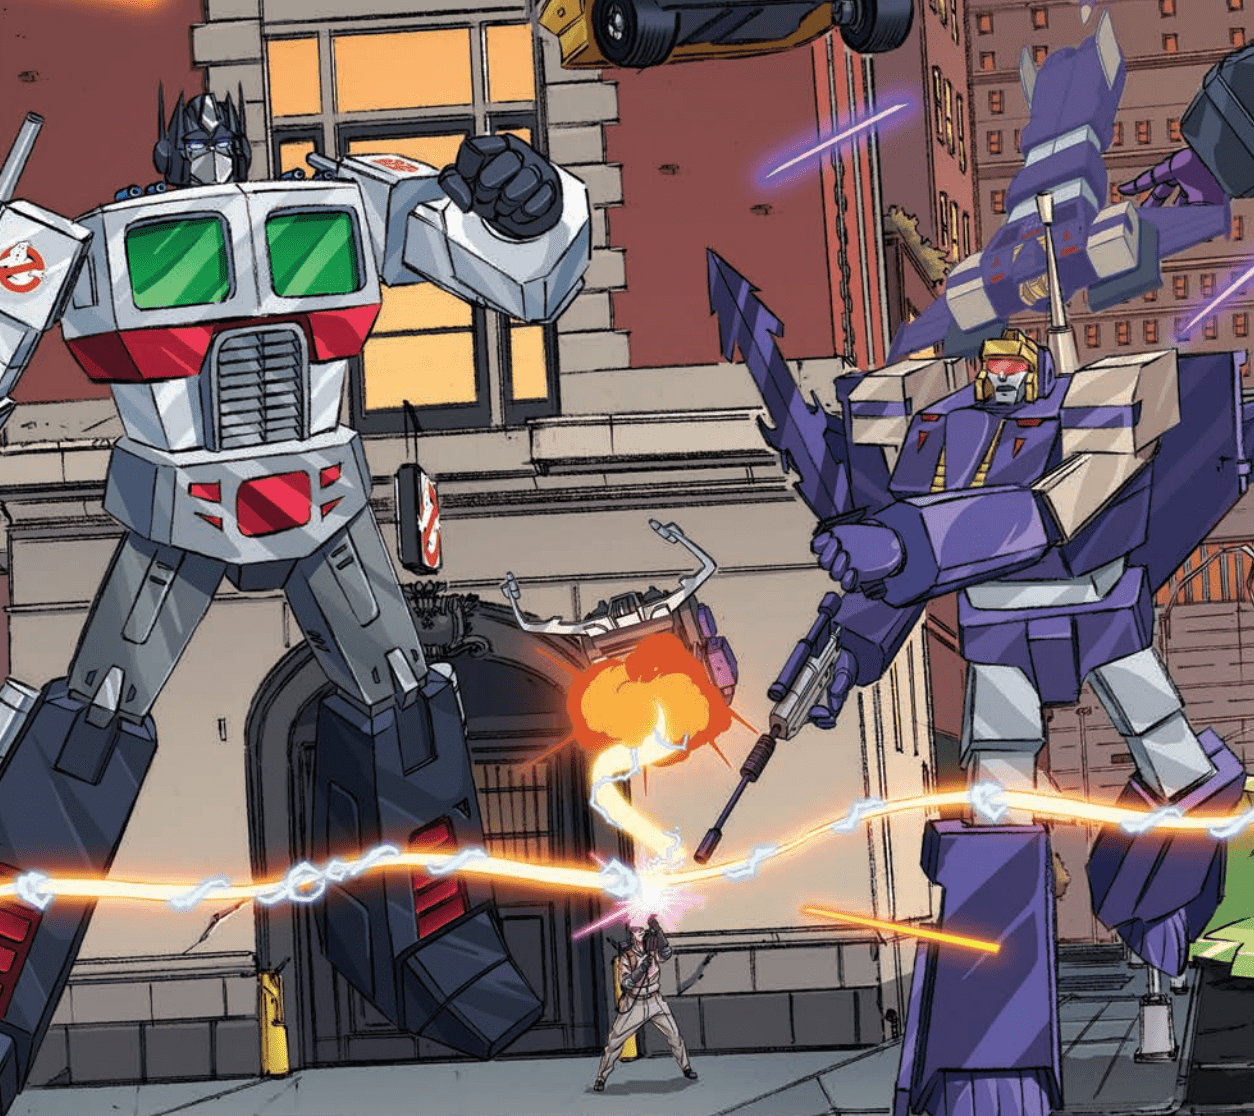 Transformers/Ghostbusters #3 review: Ghost of Cybertron Part 3